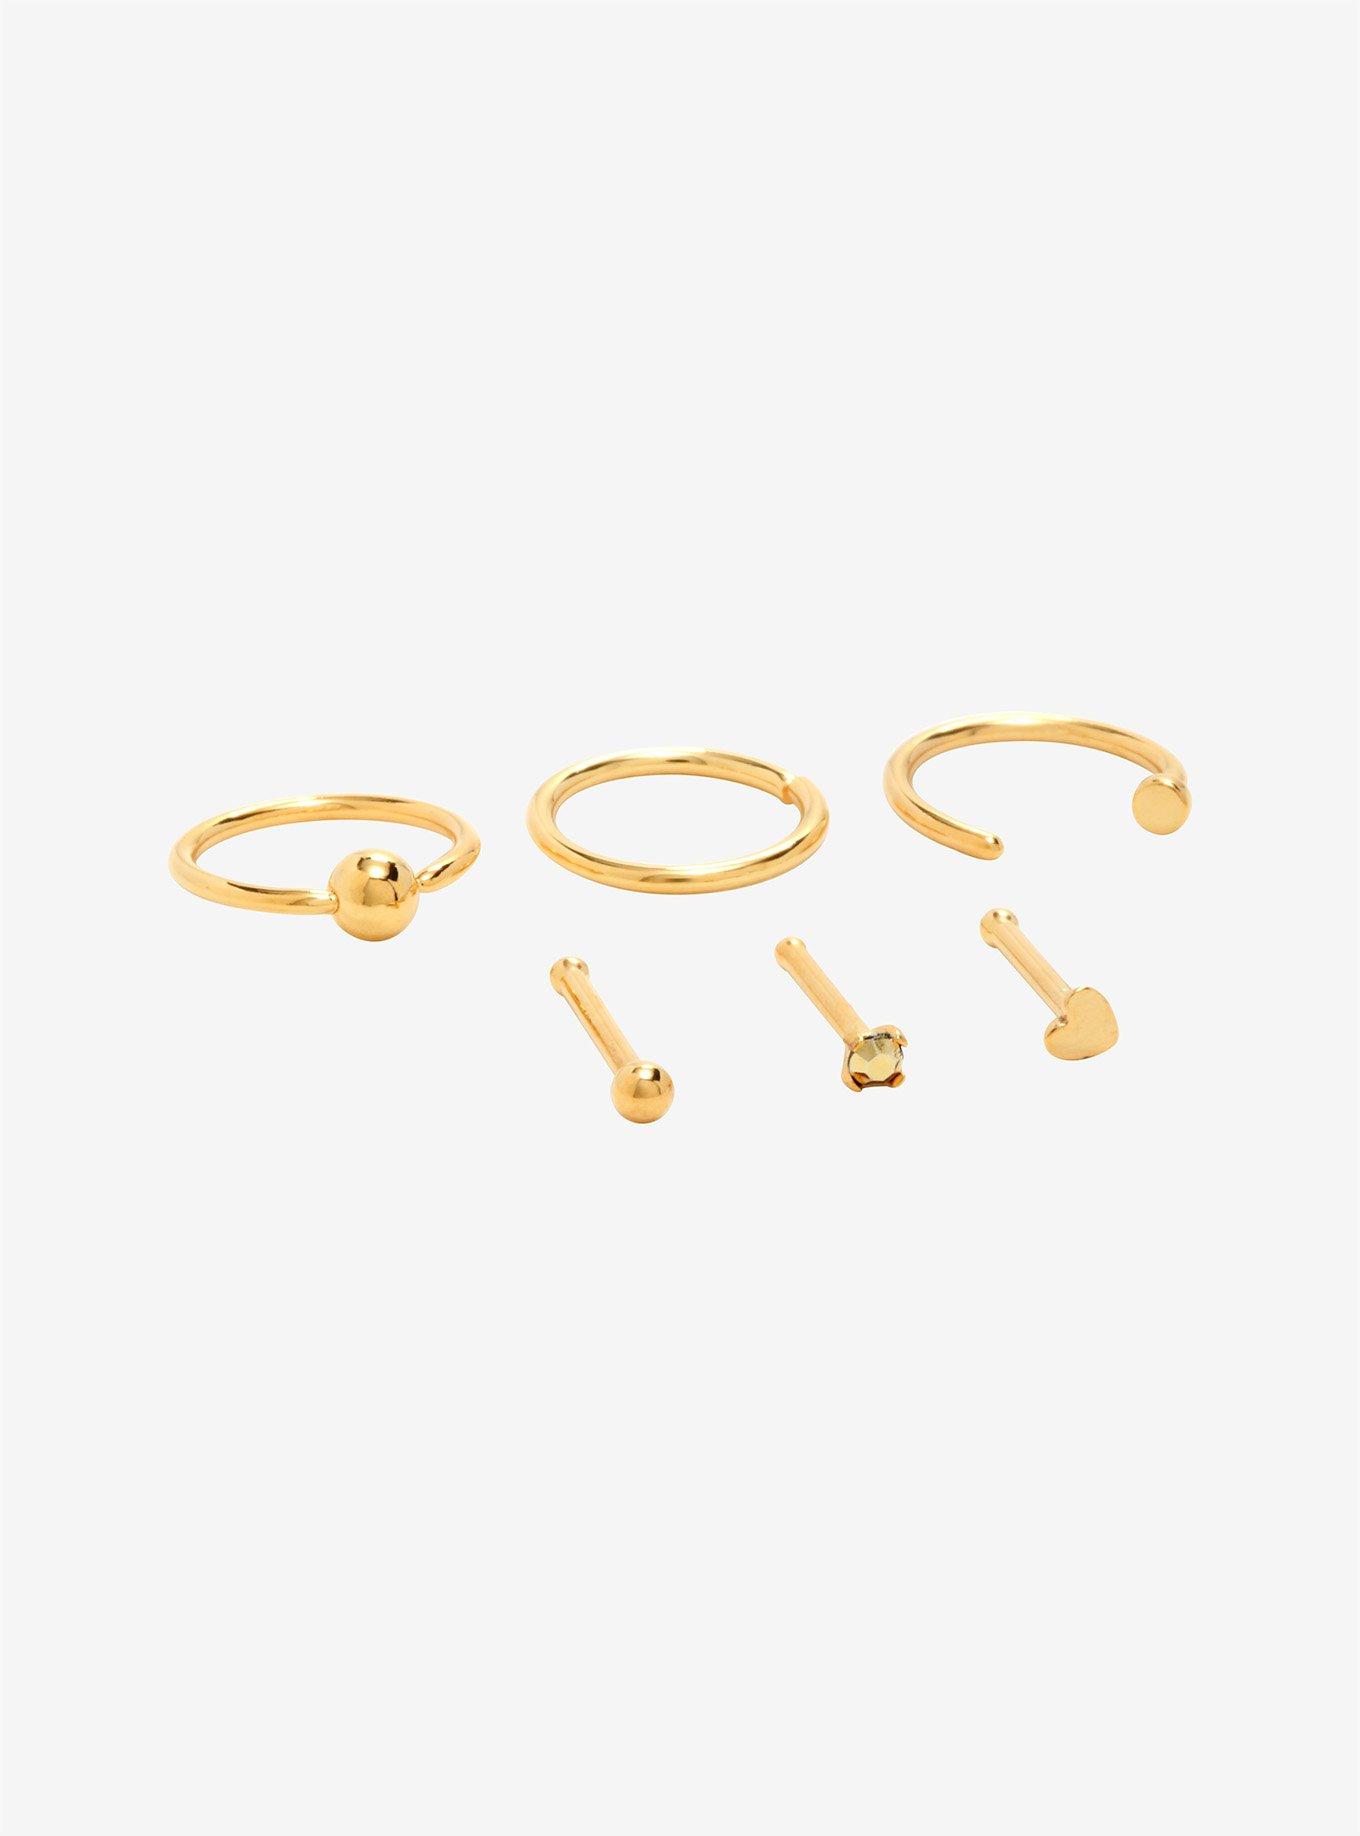 Steel Gold Hear & Yellow CZ Nose Stud & Hoop 6 Pack, GOLD, hi-res